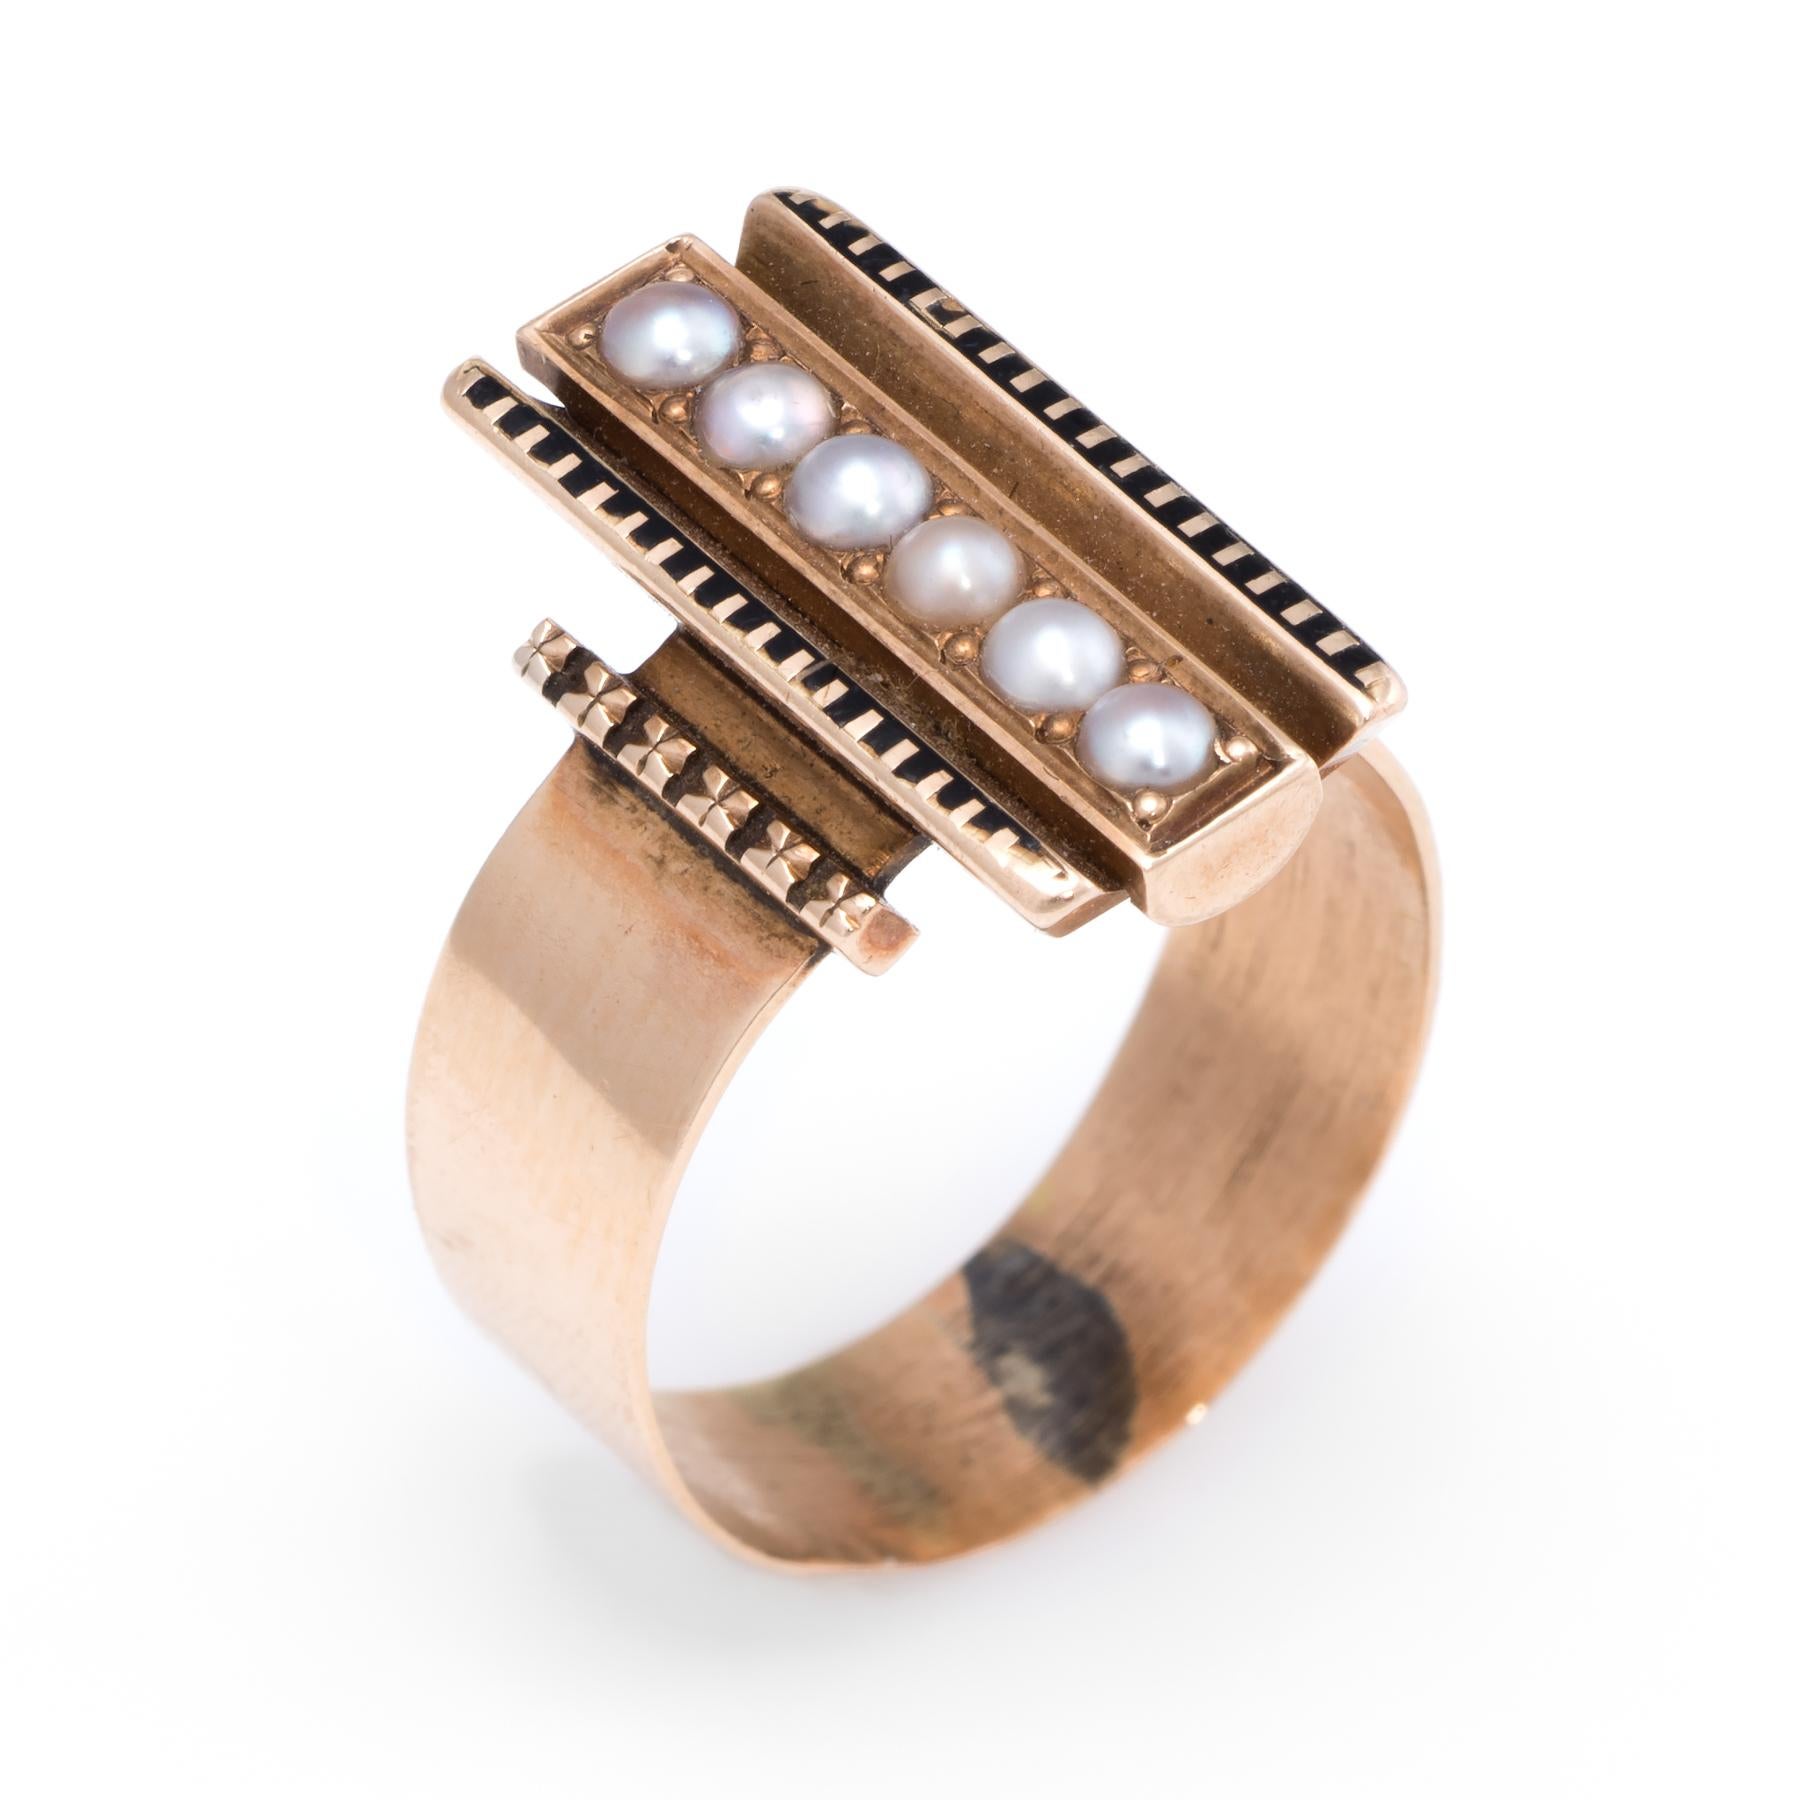 Elegant antique Victorian ring (circa 1880s to 1900s), crafted in 14 karat rose gold. 

Six seed pearls measure 3mm each. The pearls are in excellent condition and free of cracks or chips. The mount is accented with black enamel (slight loss to the